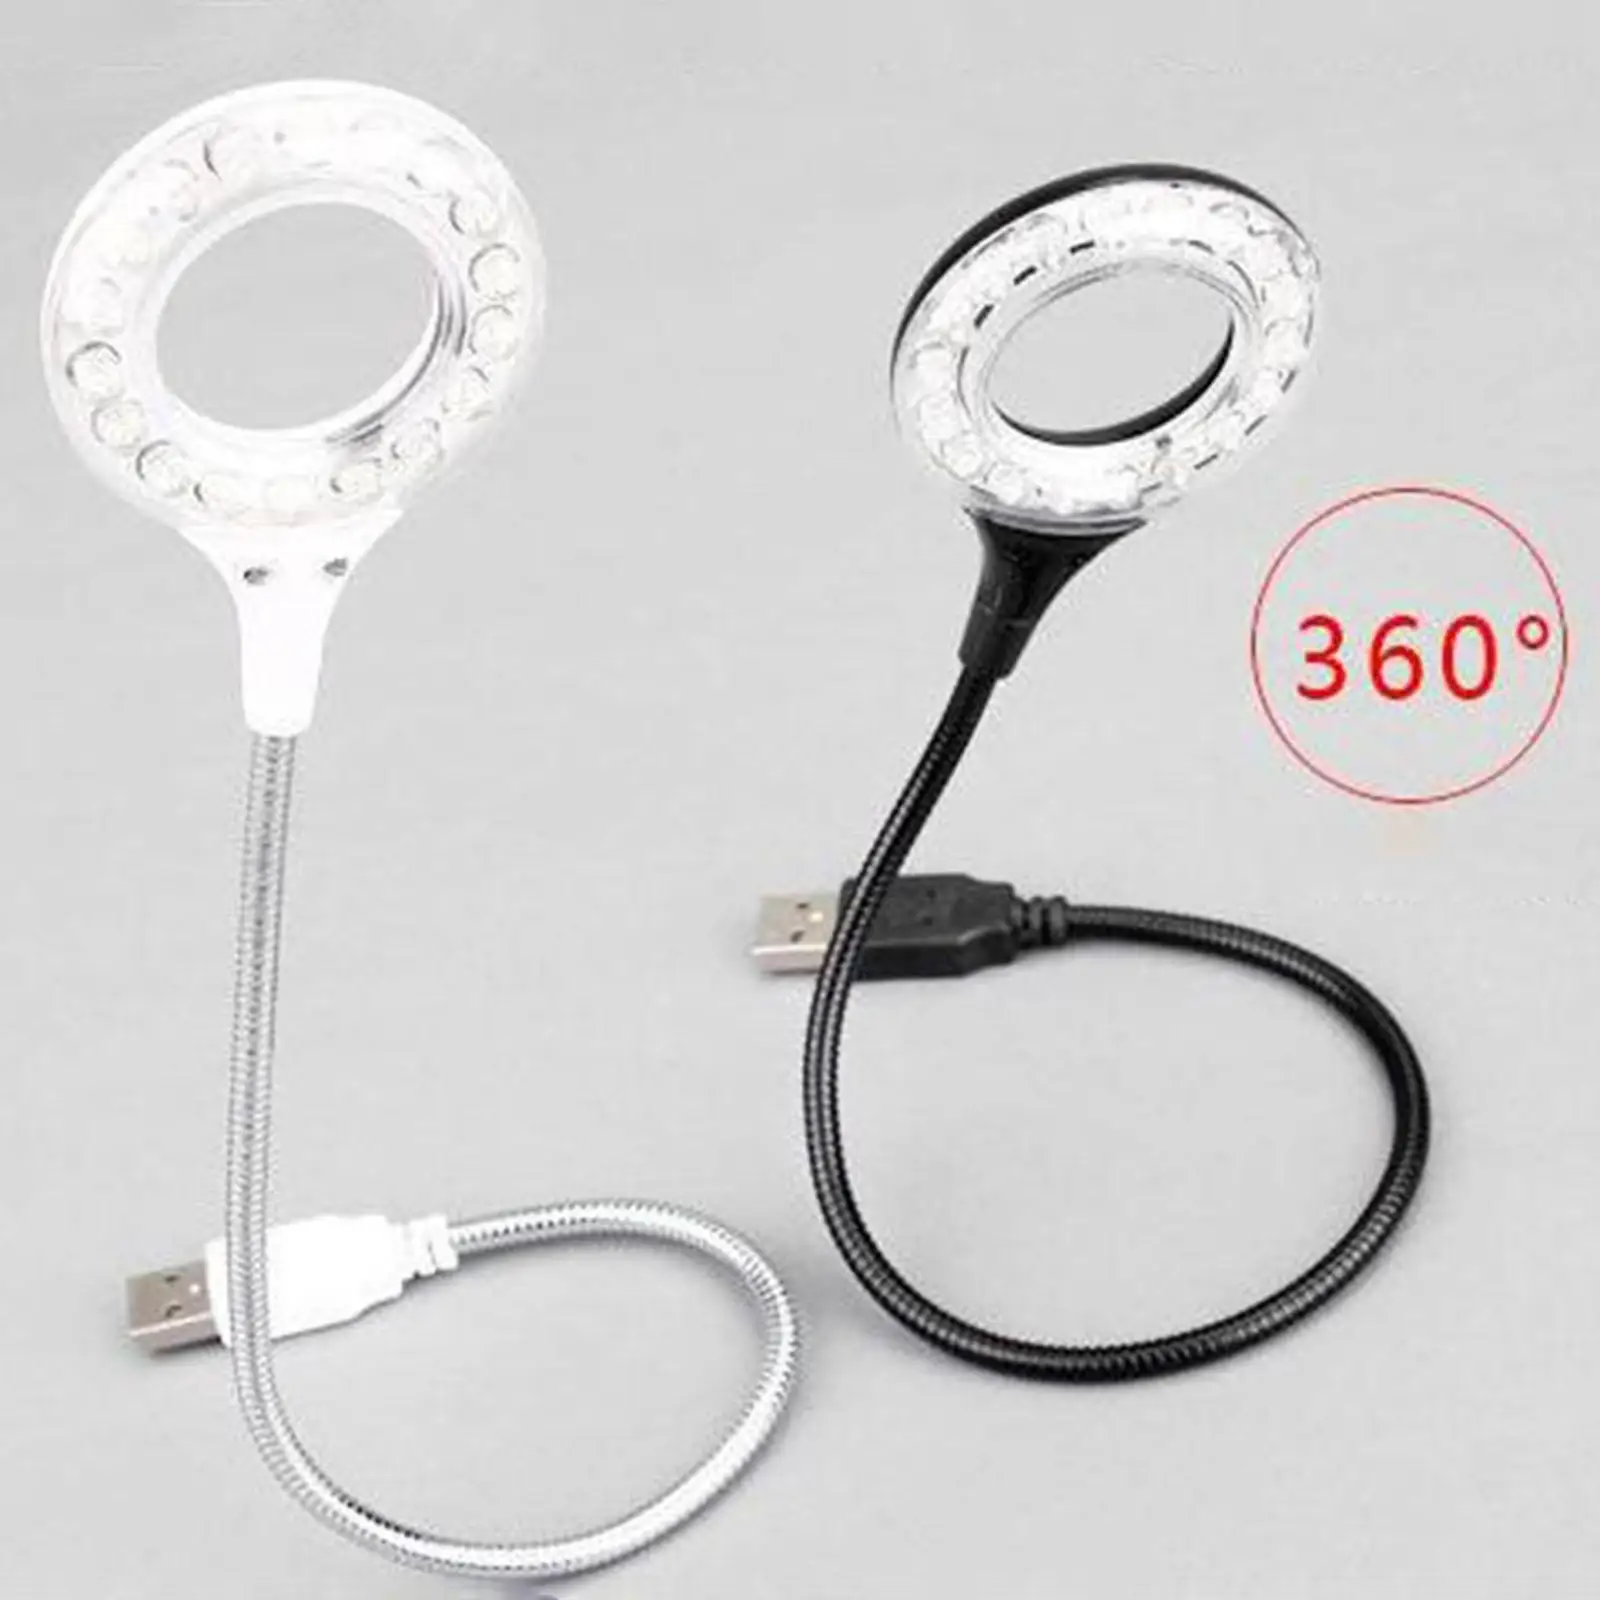 LED USB Circular Light Freely Foldable Night Lamp, Offering Soft Light Source Eye Protection